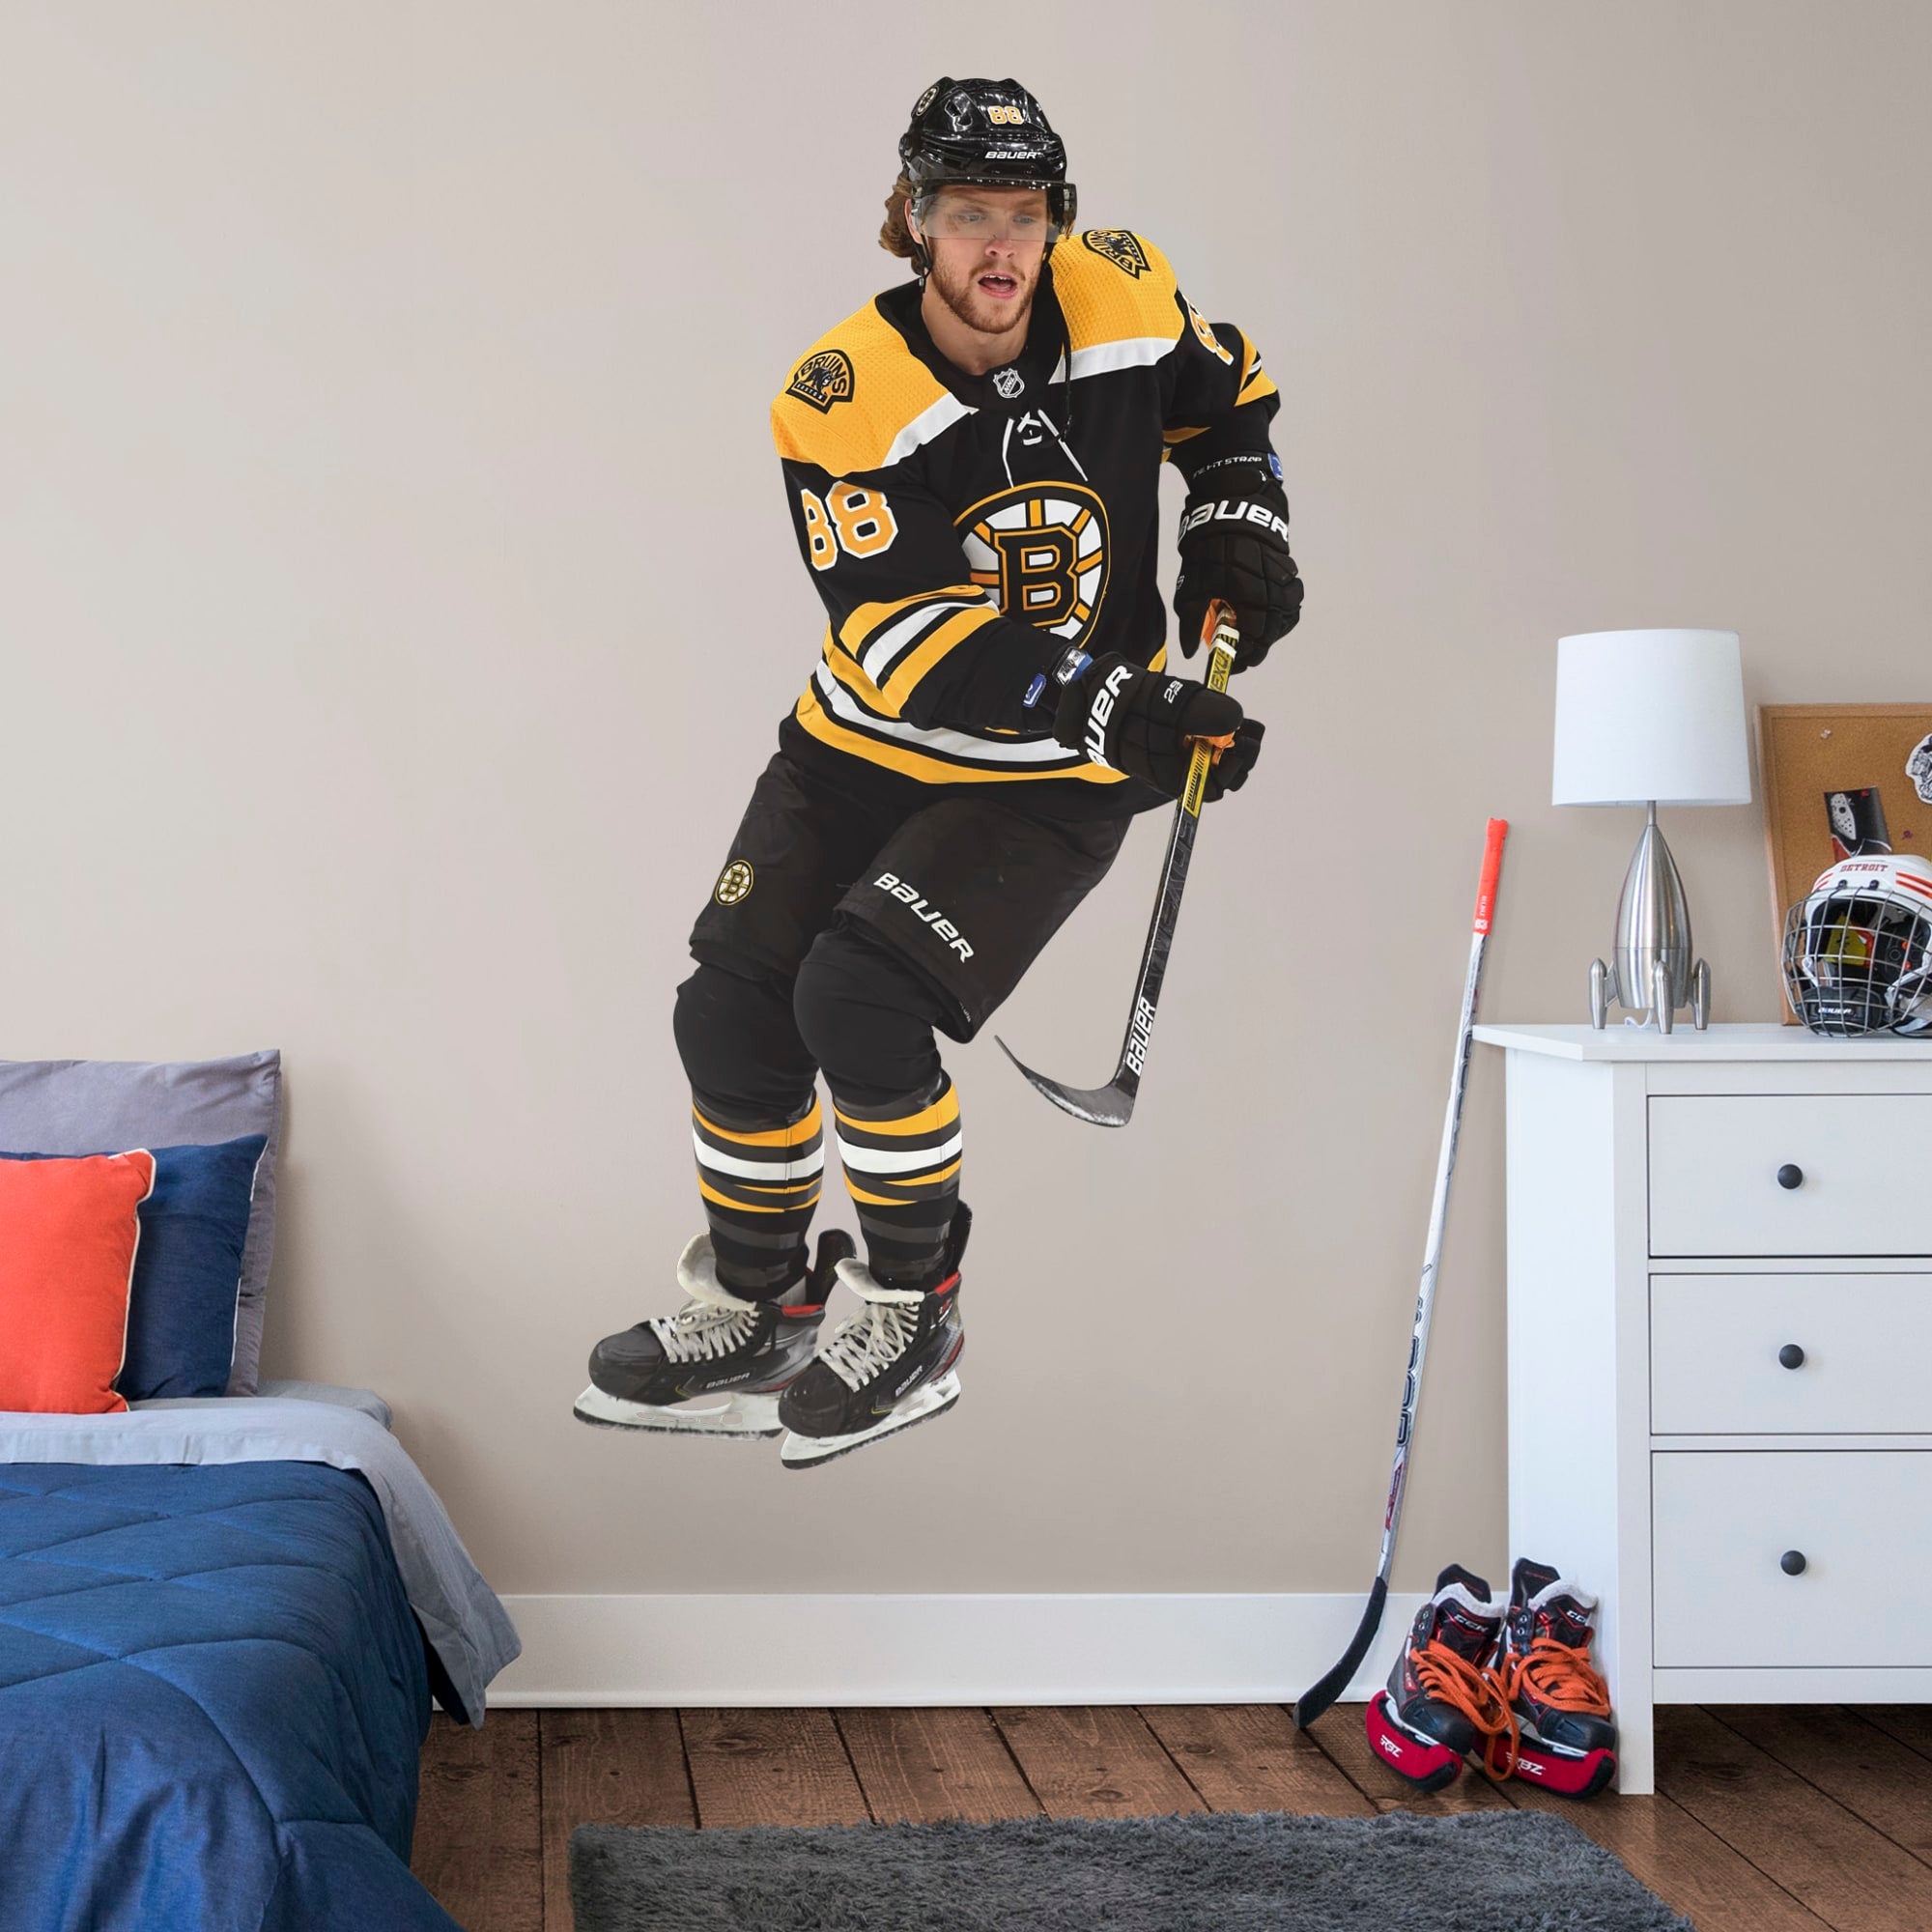 David Pastrnak for Boston Bruins - Officially Licensed NHL Removable Wall Decal Life-Size Athlete + 2 Decals (41"W x 78"H) by Fa